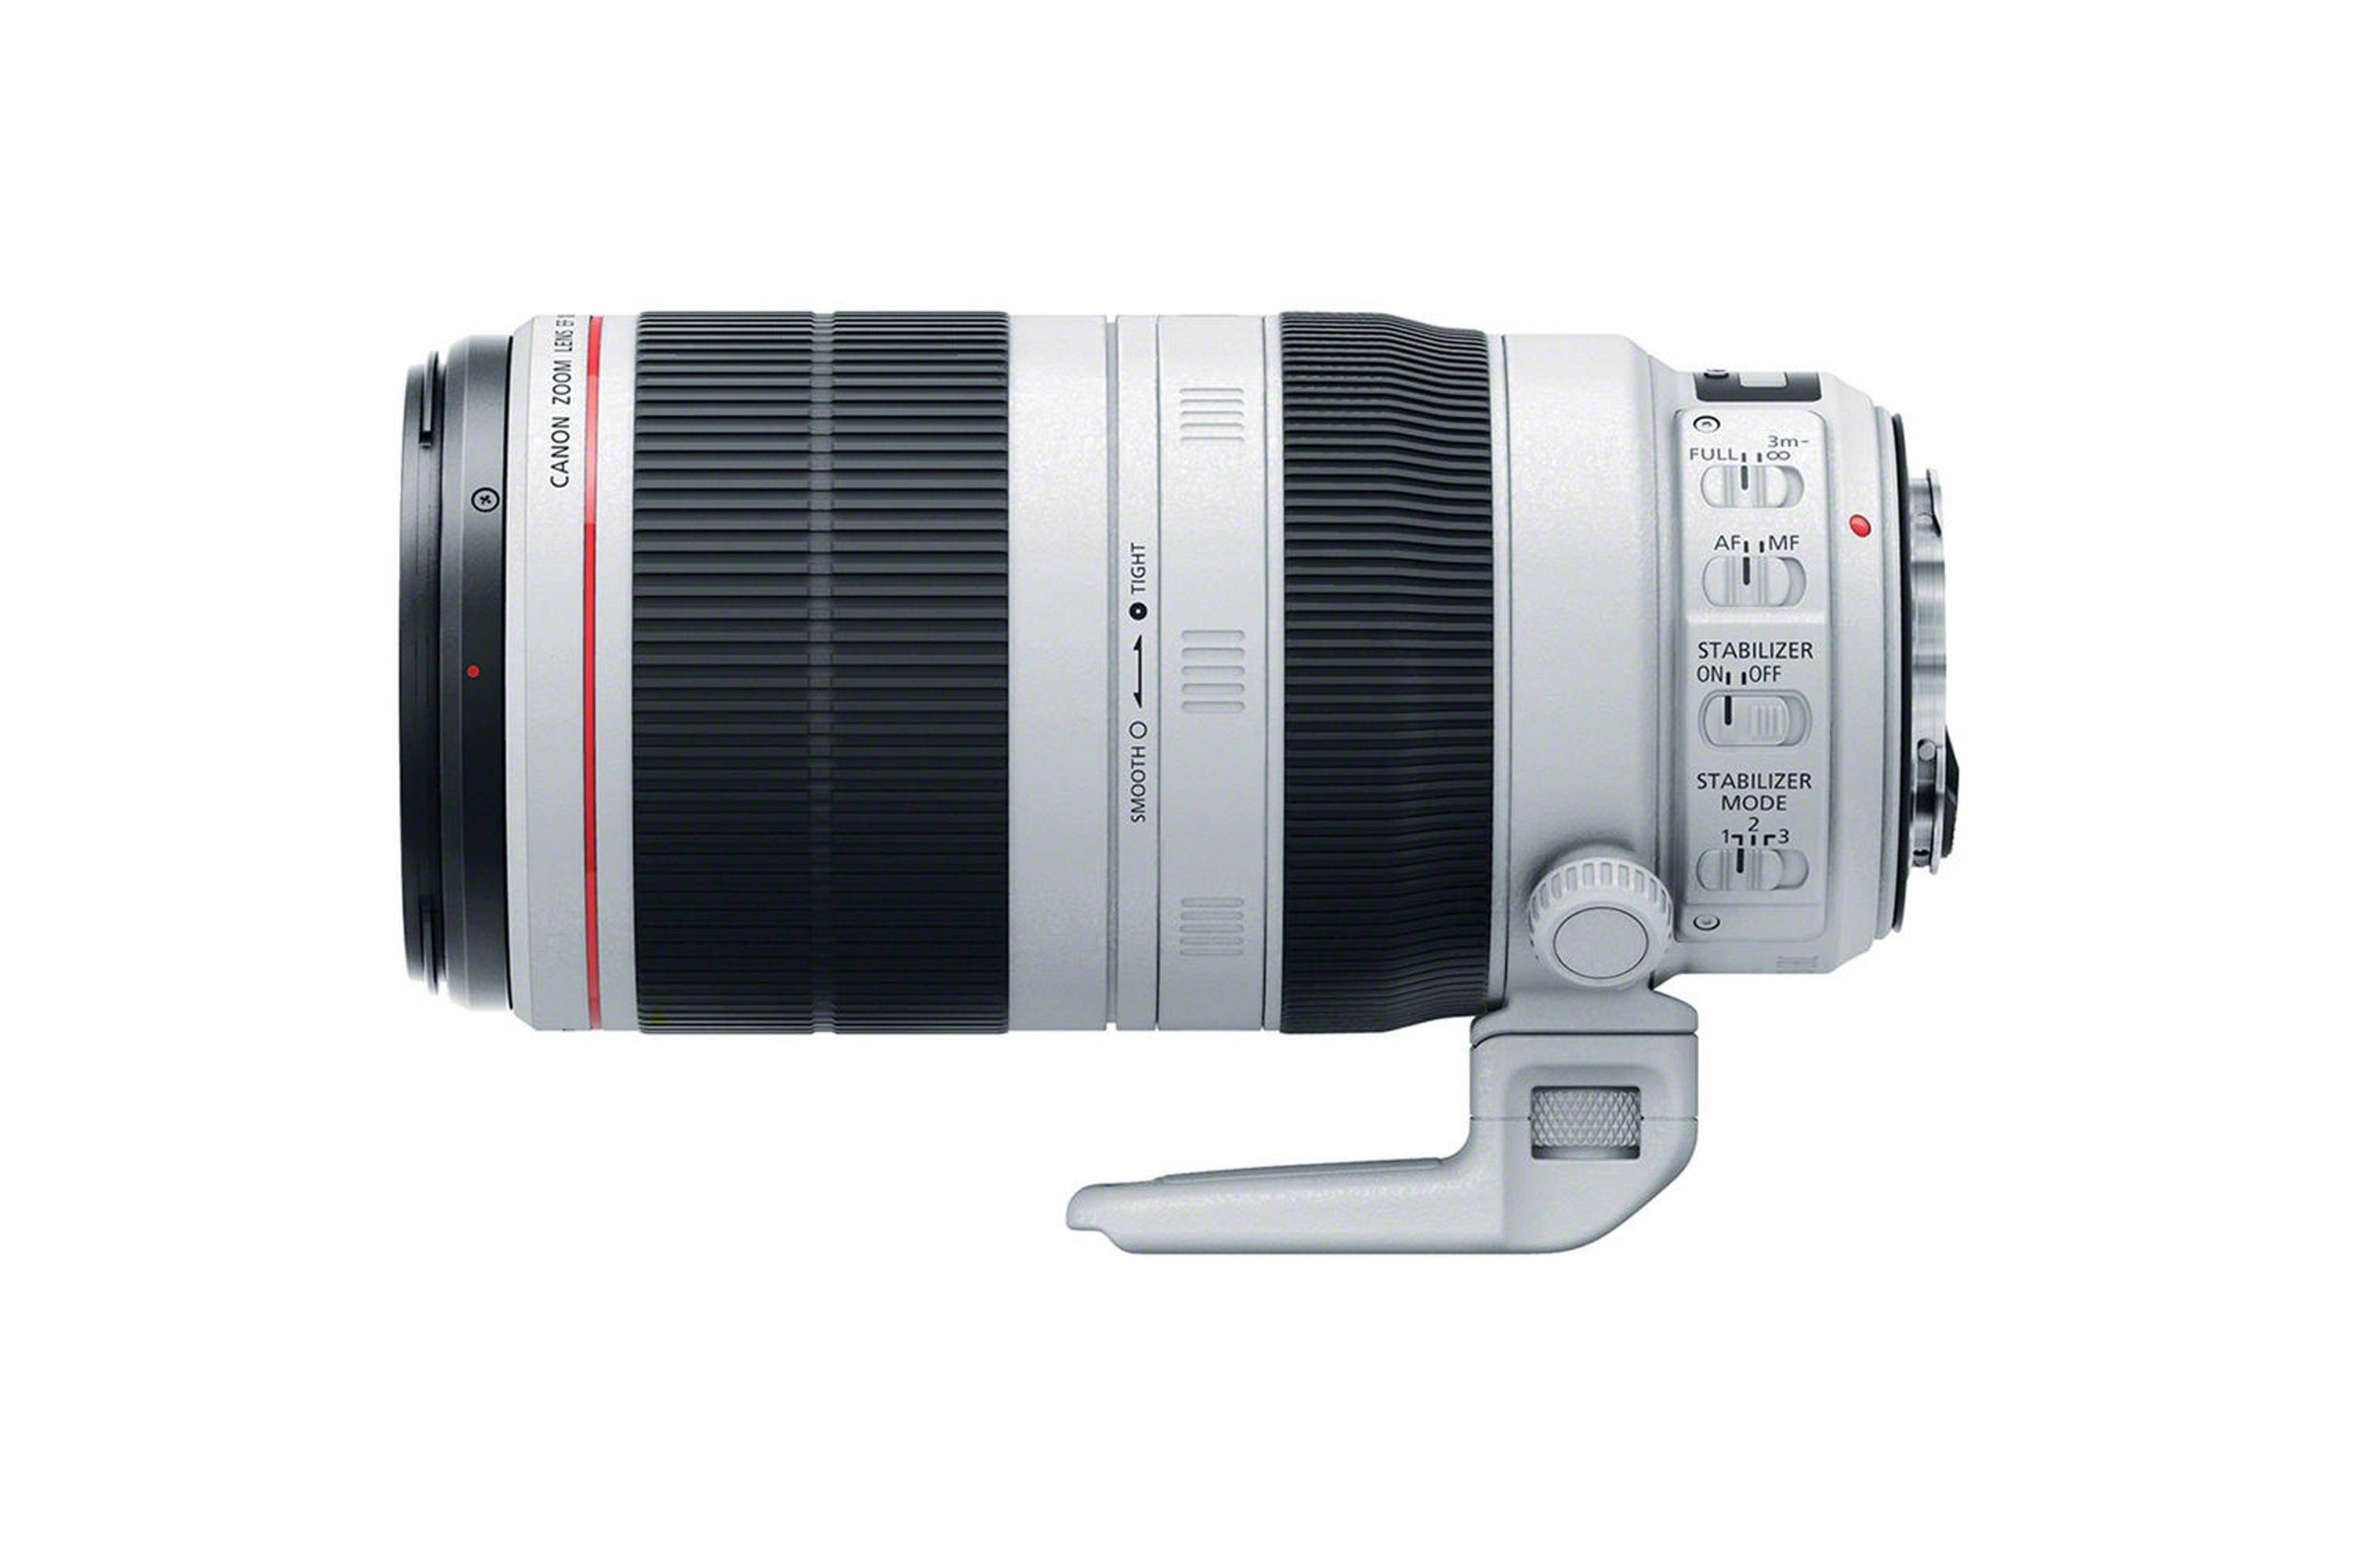 Canon Zoom Lens EF 100-400mm 1:4.5-5.6L IS II USM Canon Zoom Lens EF 100-400mm 1:4.5-5.6L IS II USM